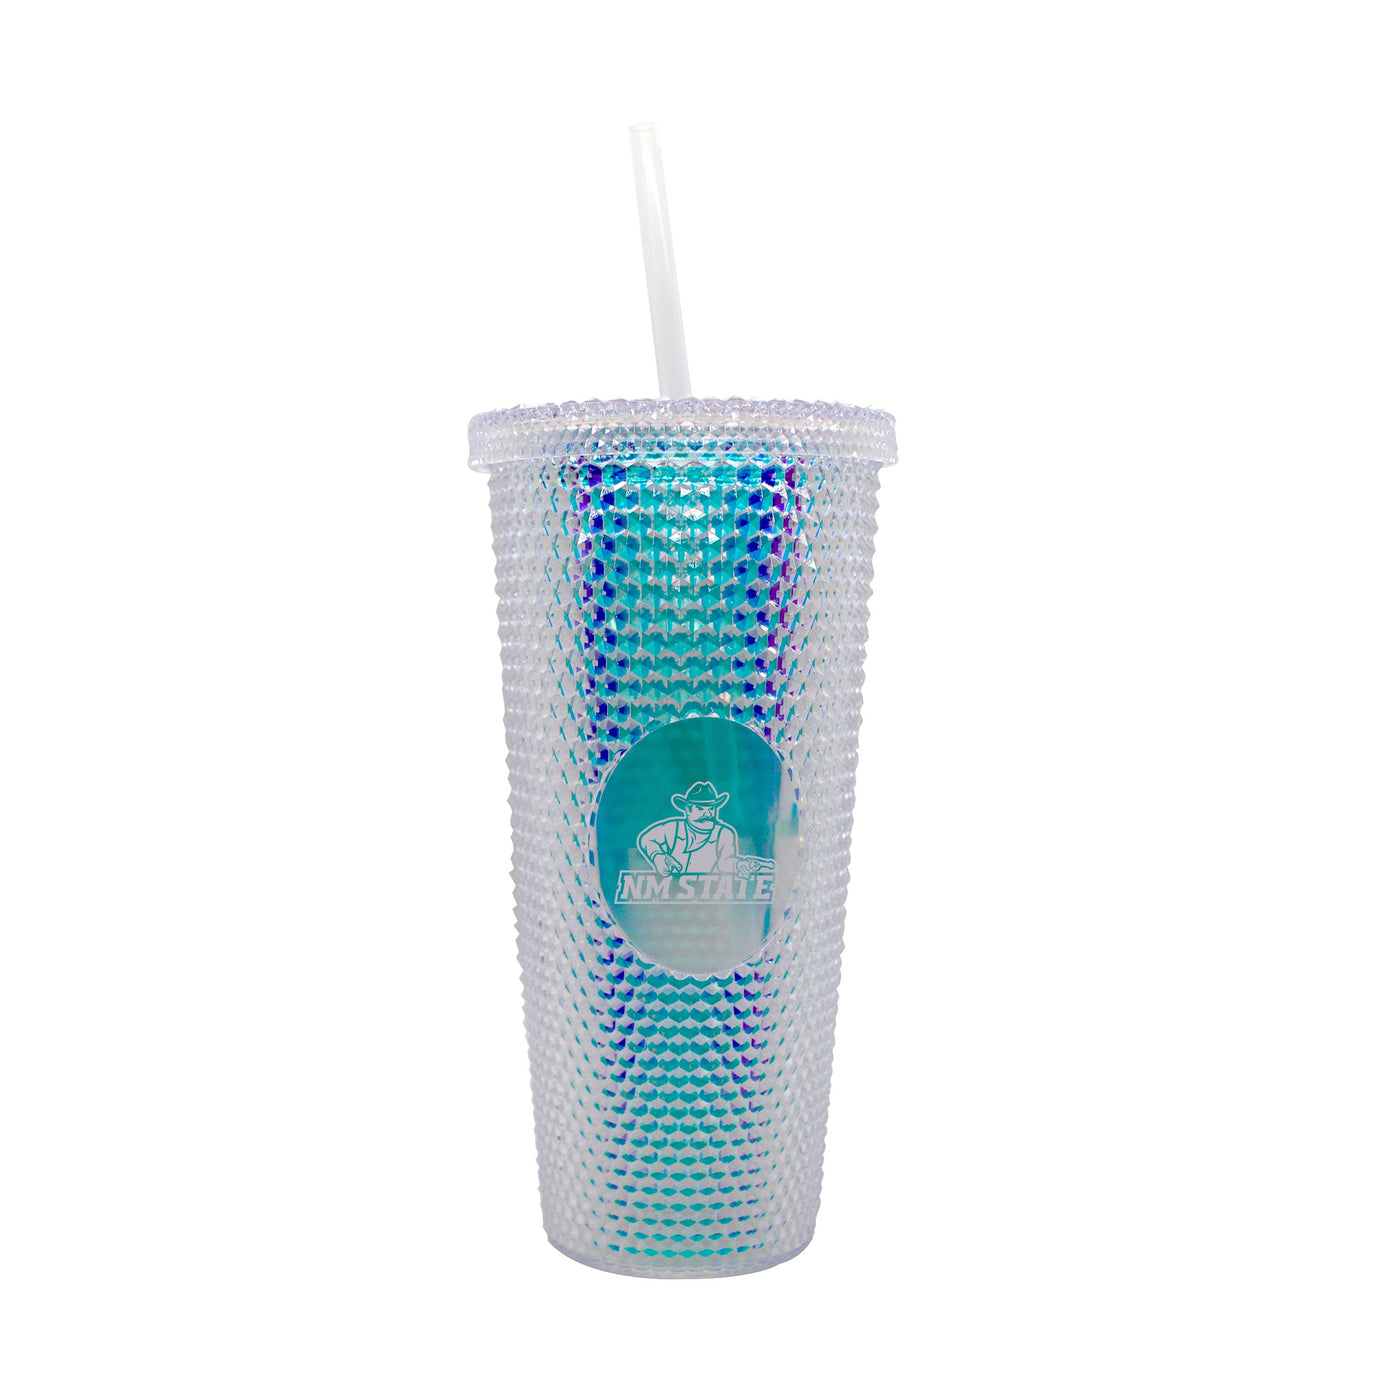 New Mexico State 24oz Iridescent Studded Tumbler